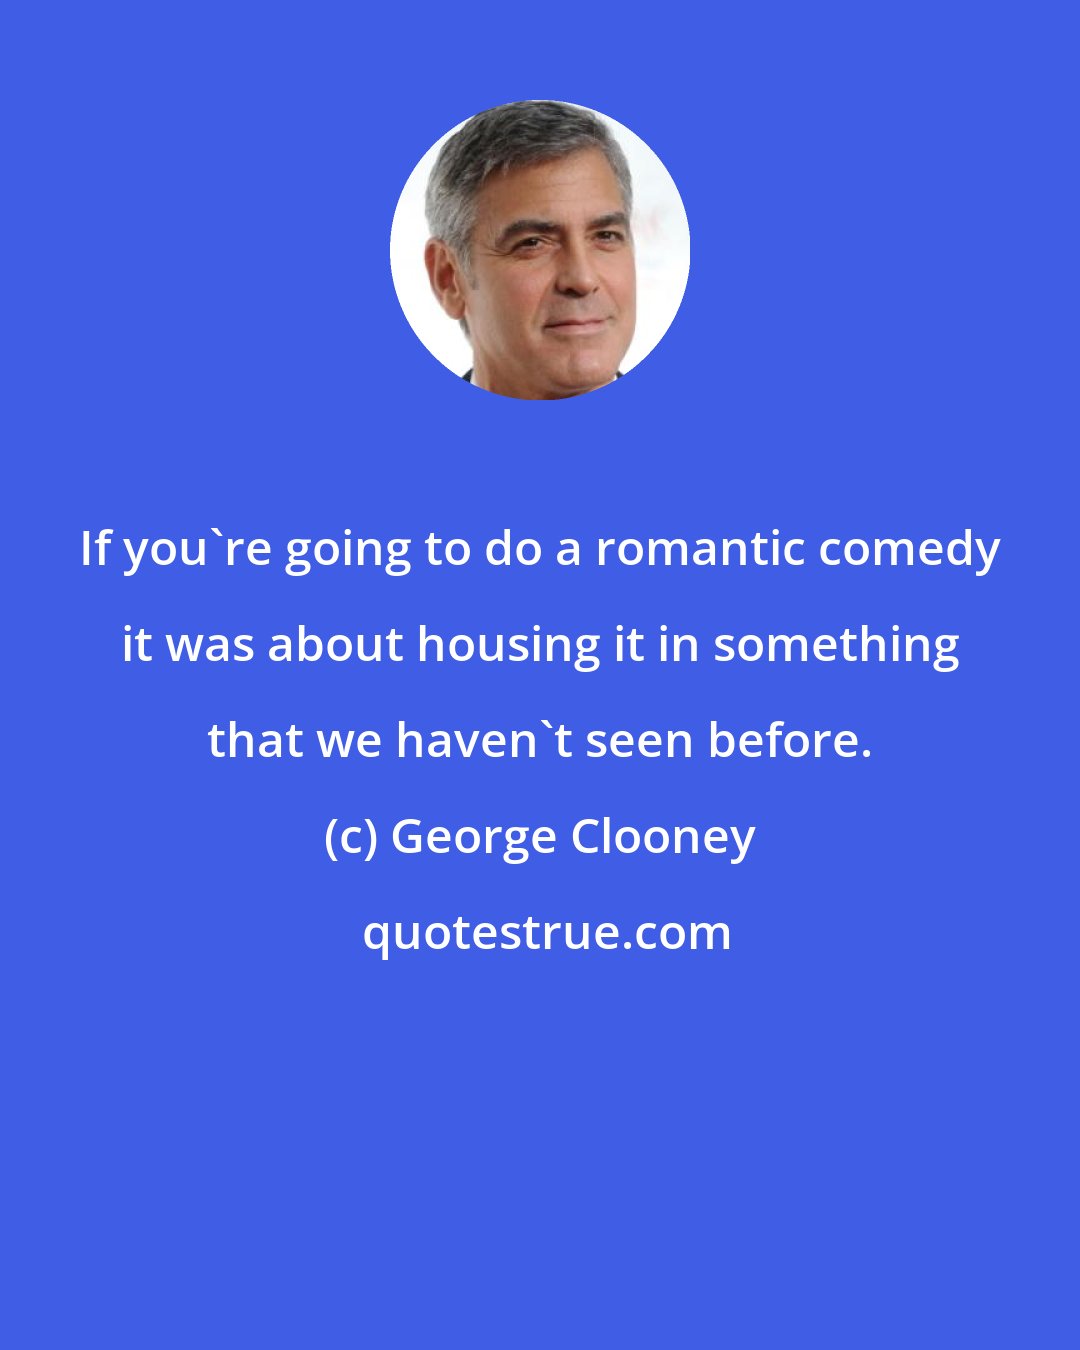 George Clooney: If you're going to do a romantic comedy it was about housing it in something that we haven't seen before.